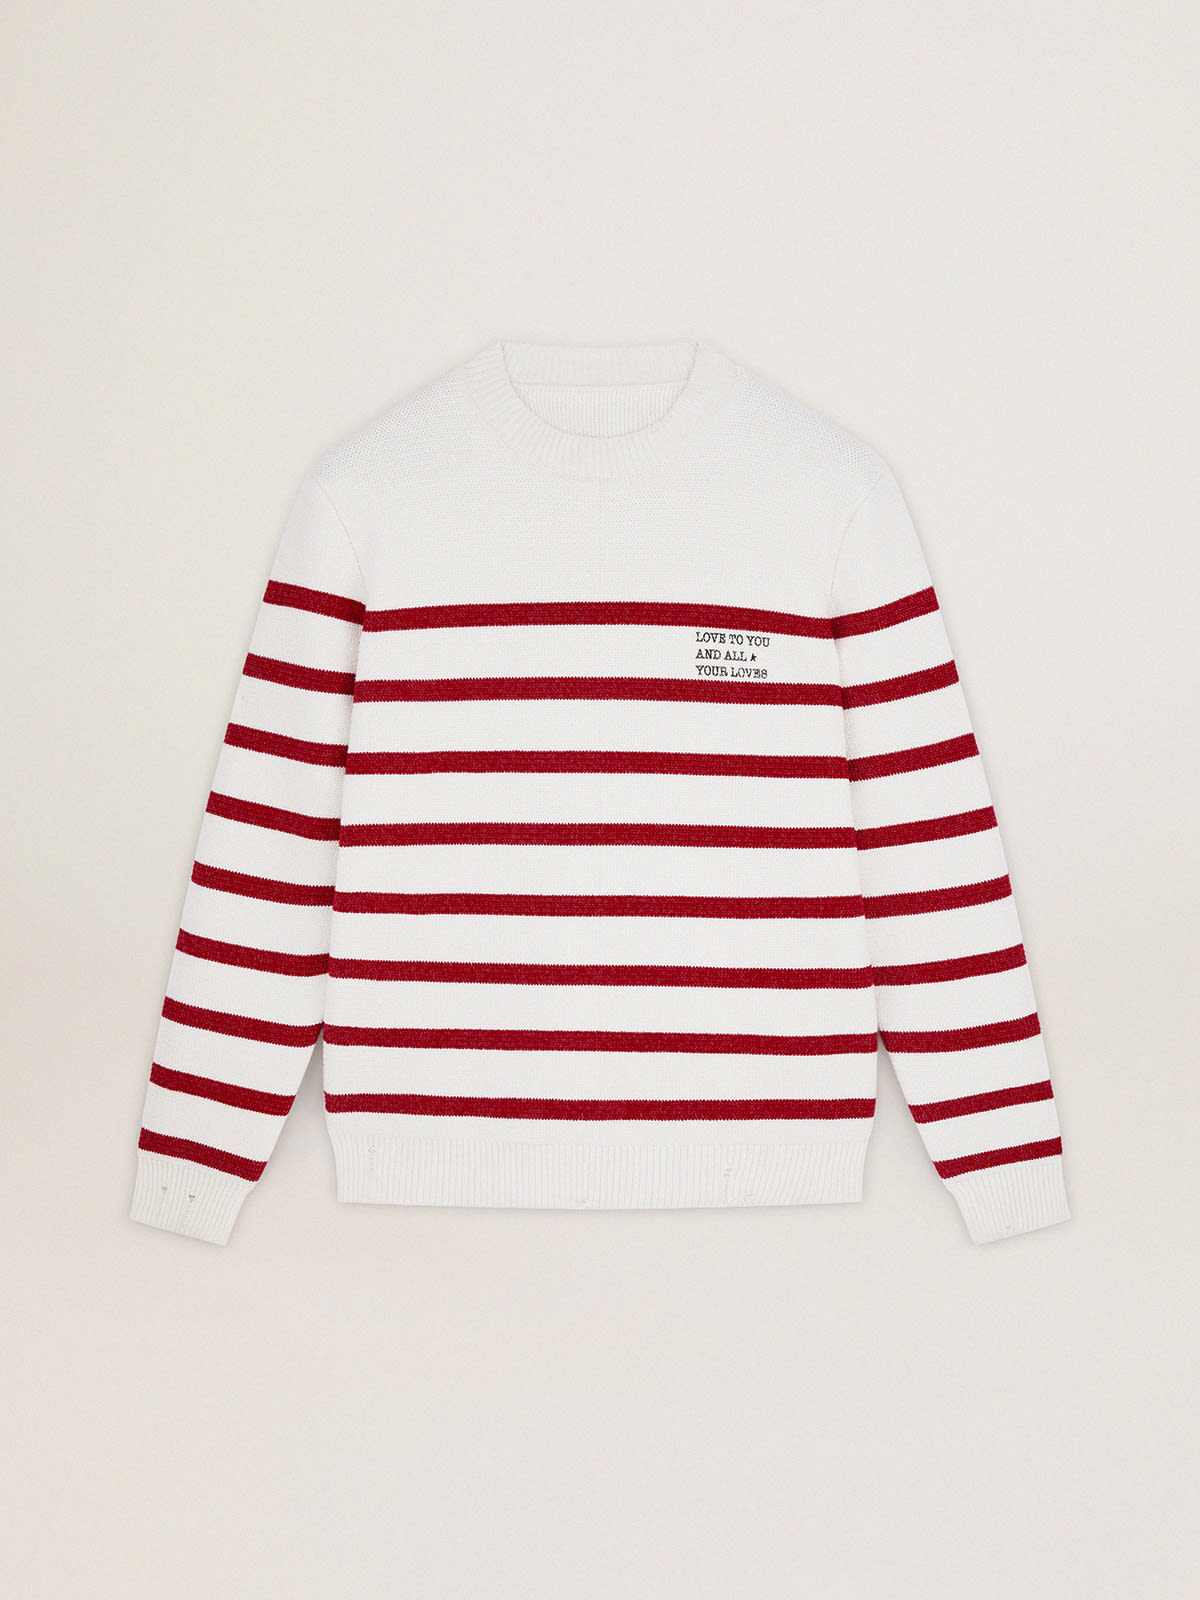 Golden Goose - White cotton Journey Collection pullover with red stripes and lettering on the front in 